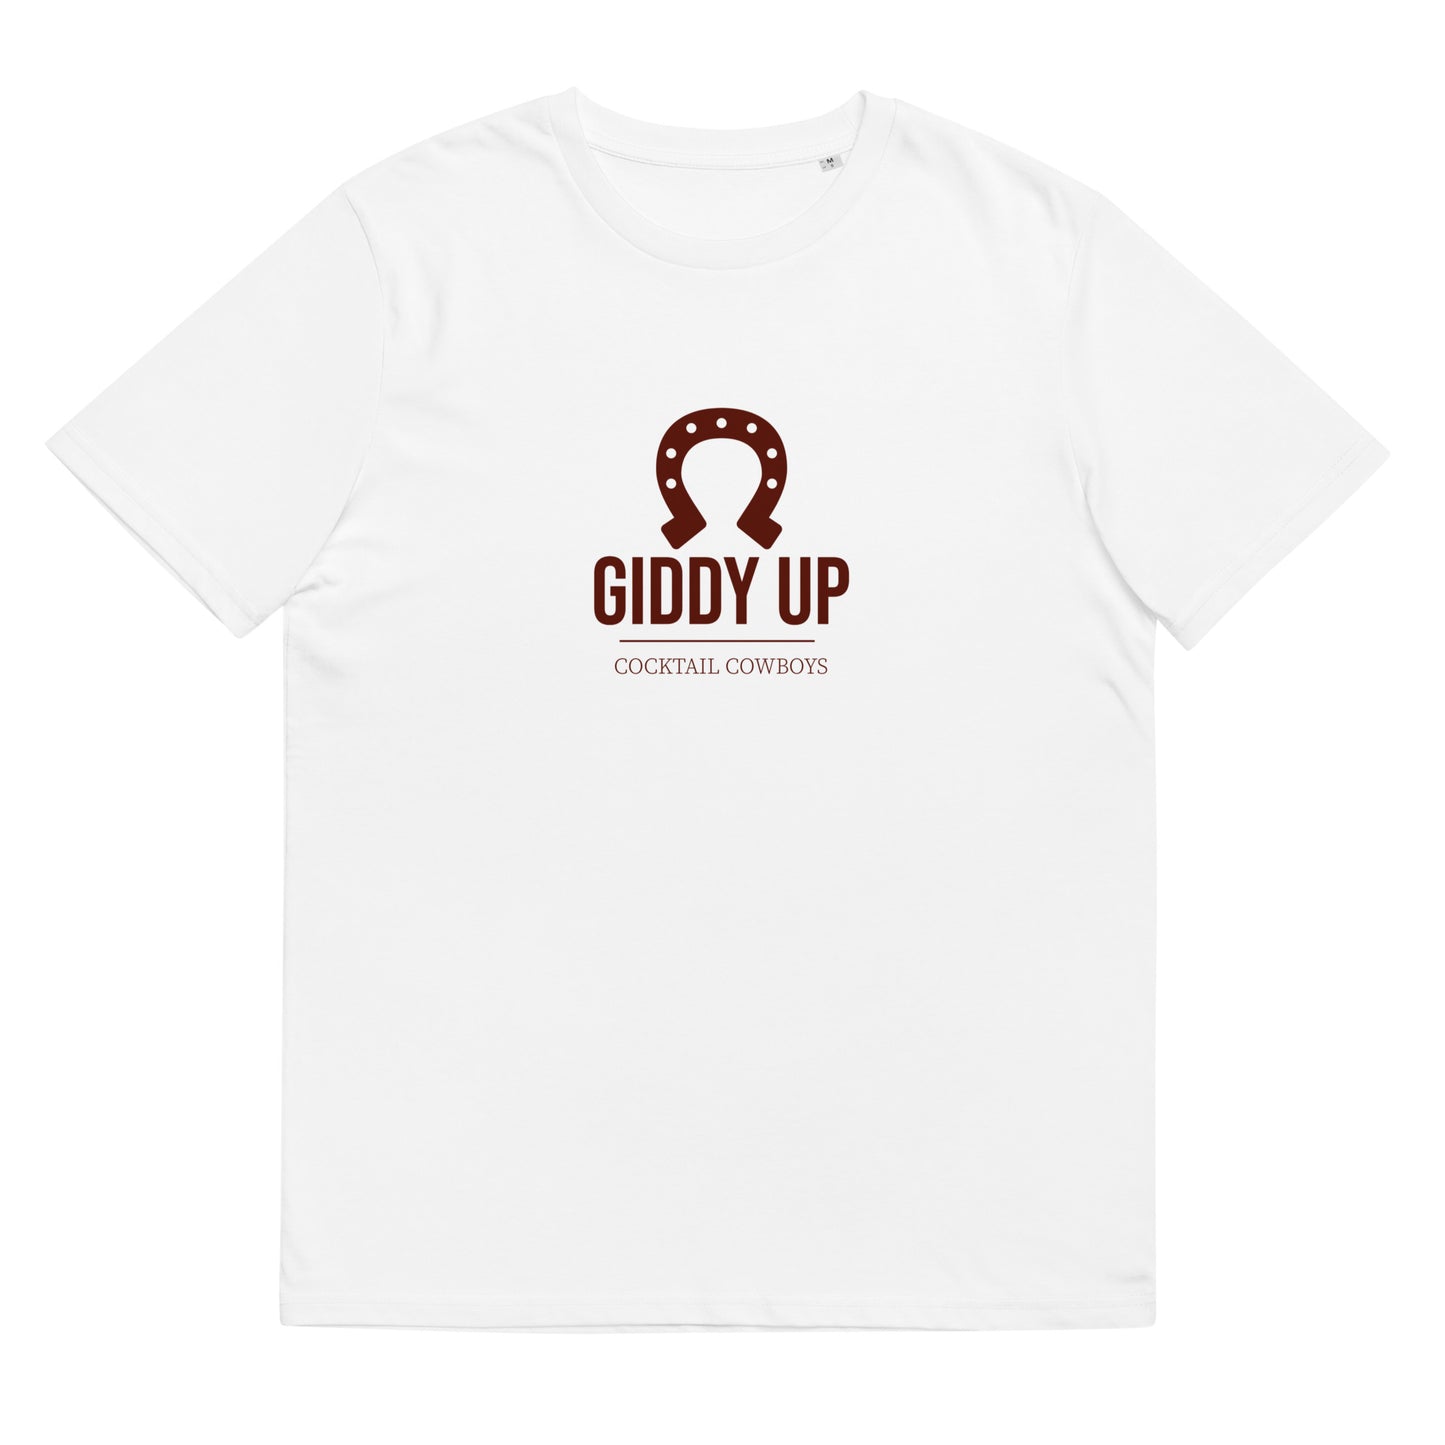 Giddy Up Cocktail Cowboys Unisex organic cotton t-shirt